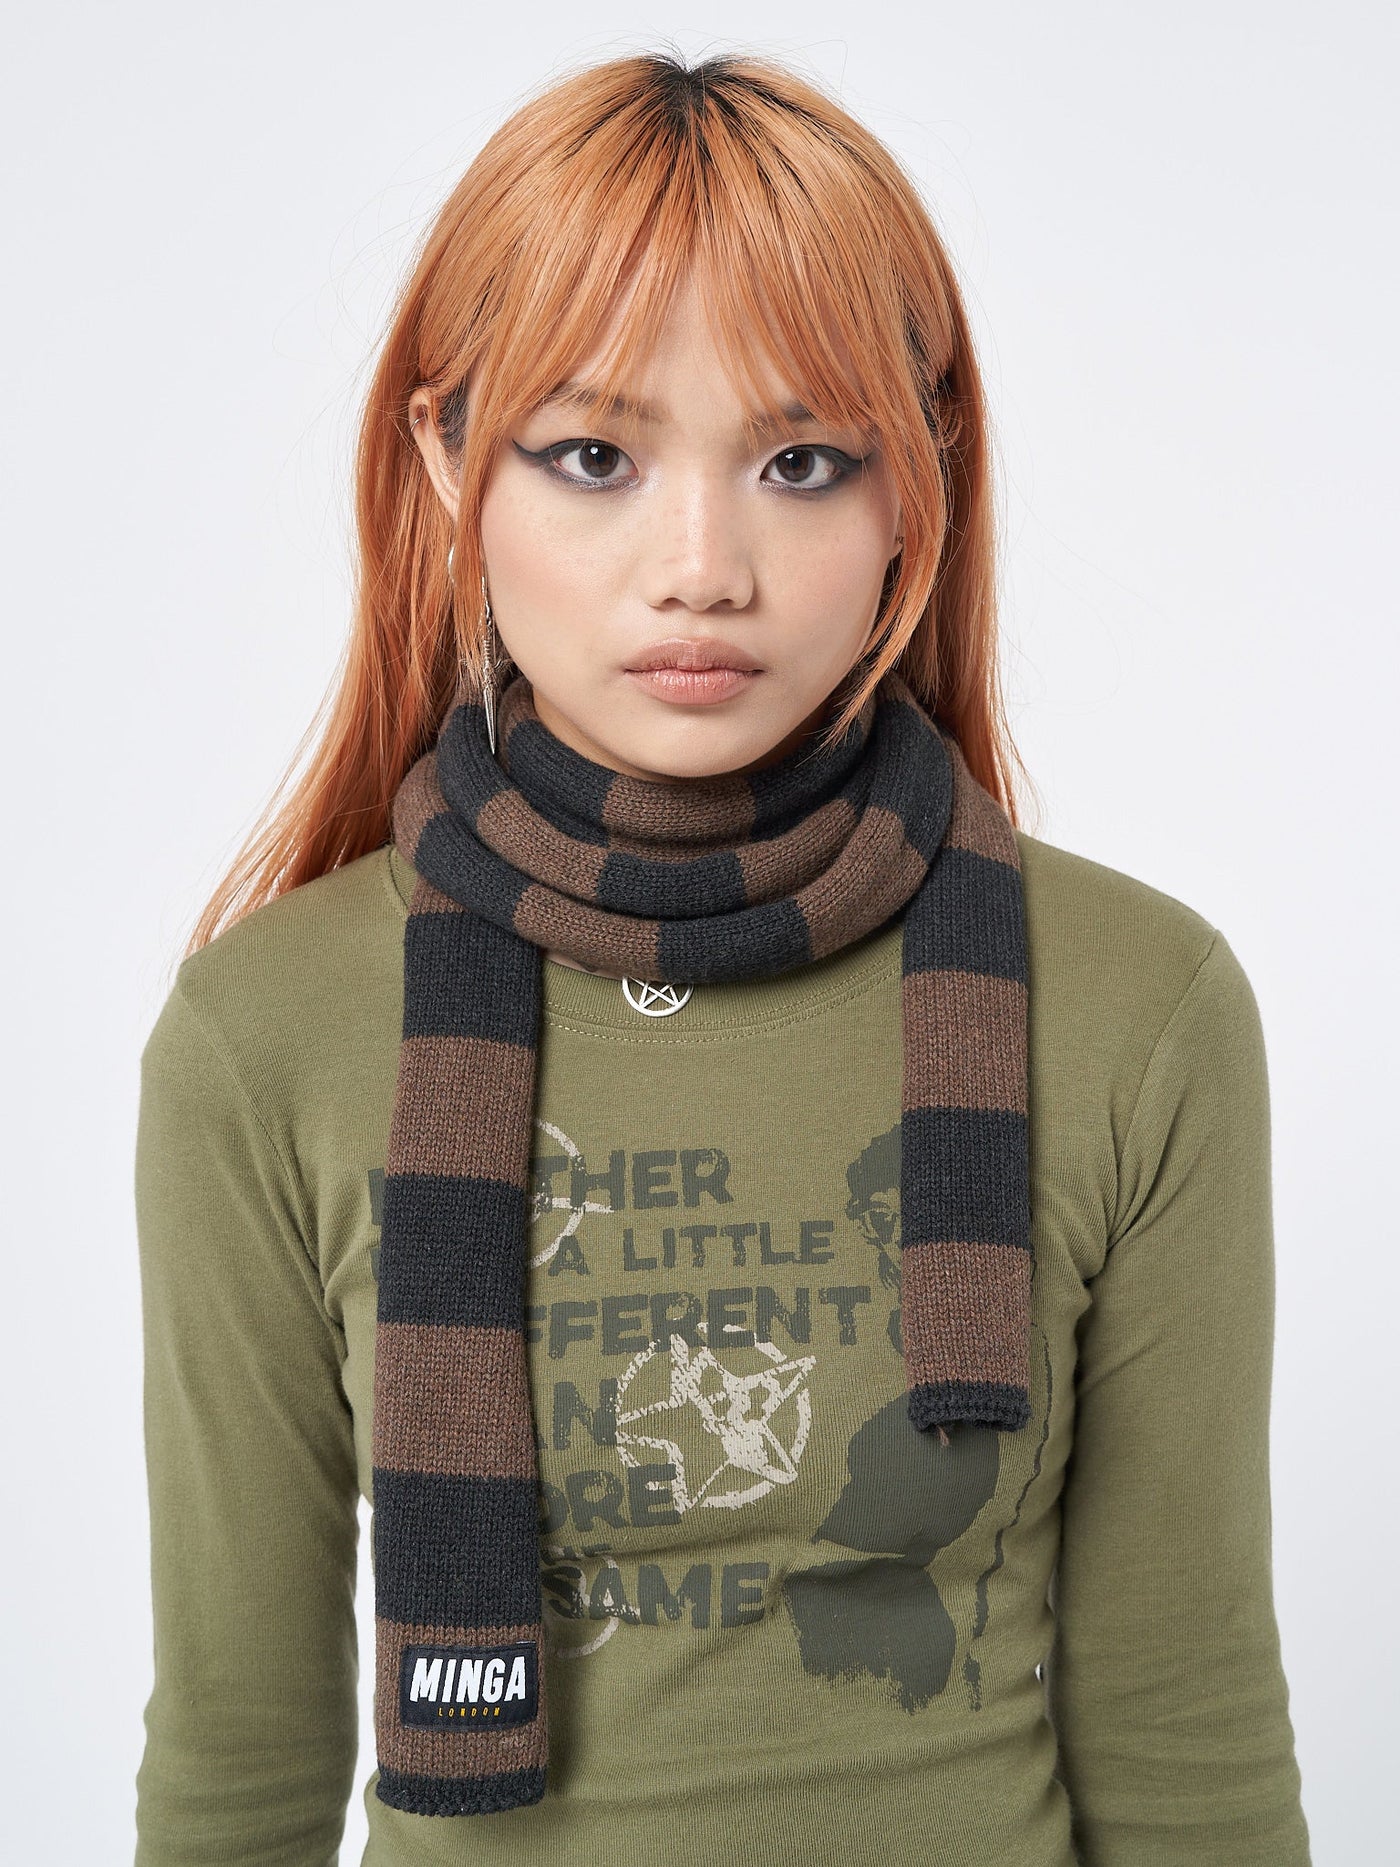 Umber Stripes Knitted Scarf